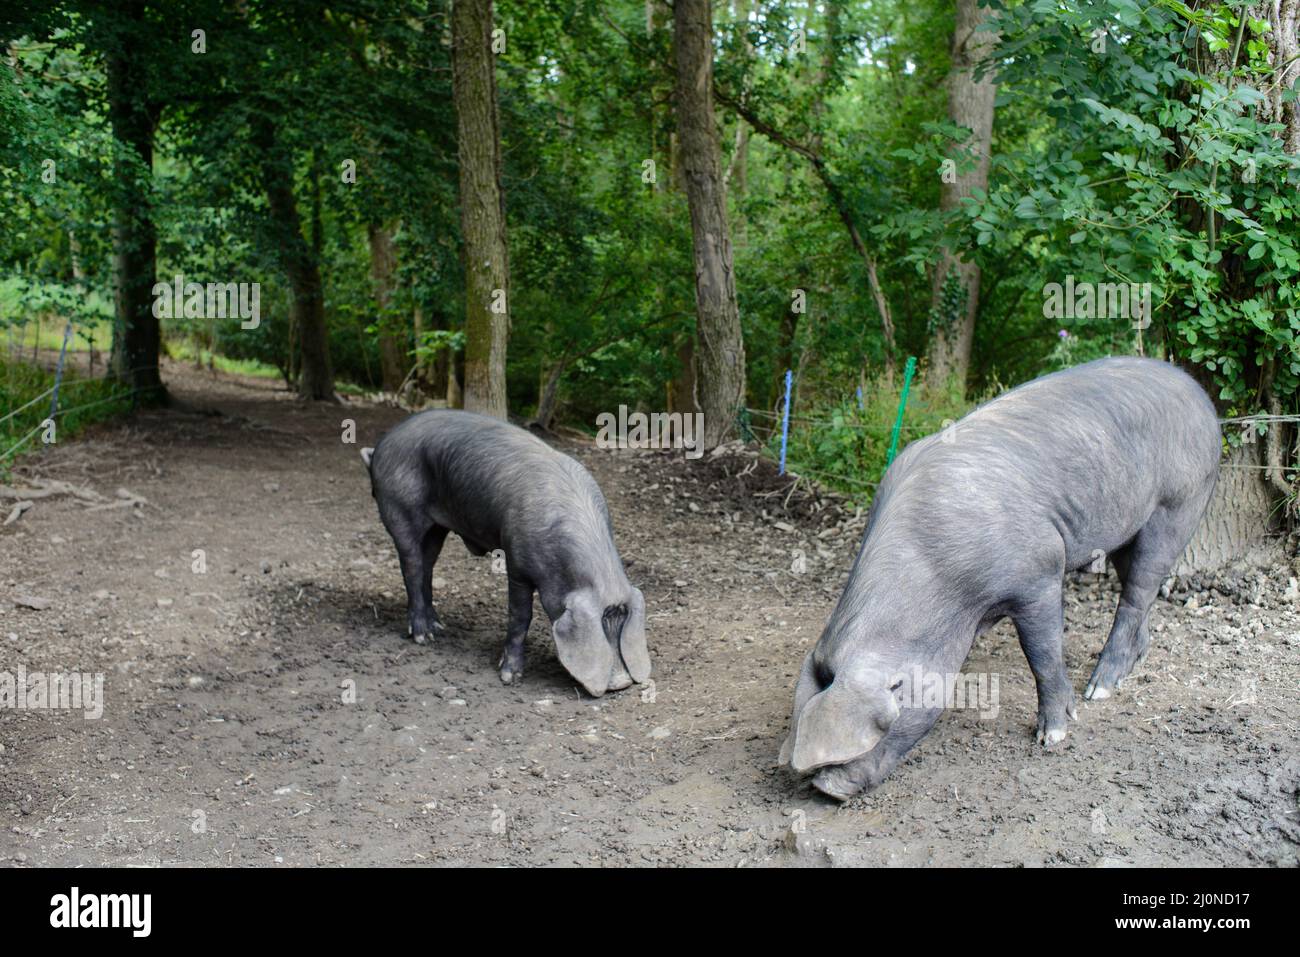 UK, England, West Country, Devonshire. Large Black British rare breed pig with lop ears. Britain’s only all-black pig. Stock Photo